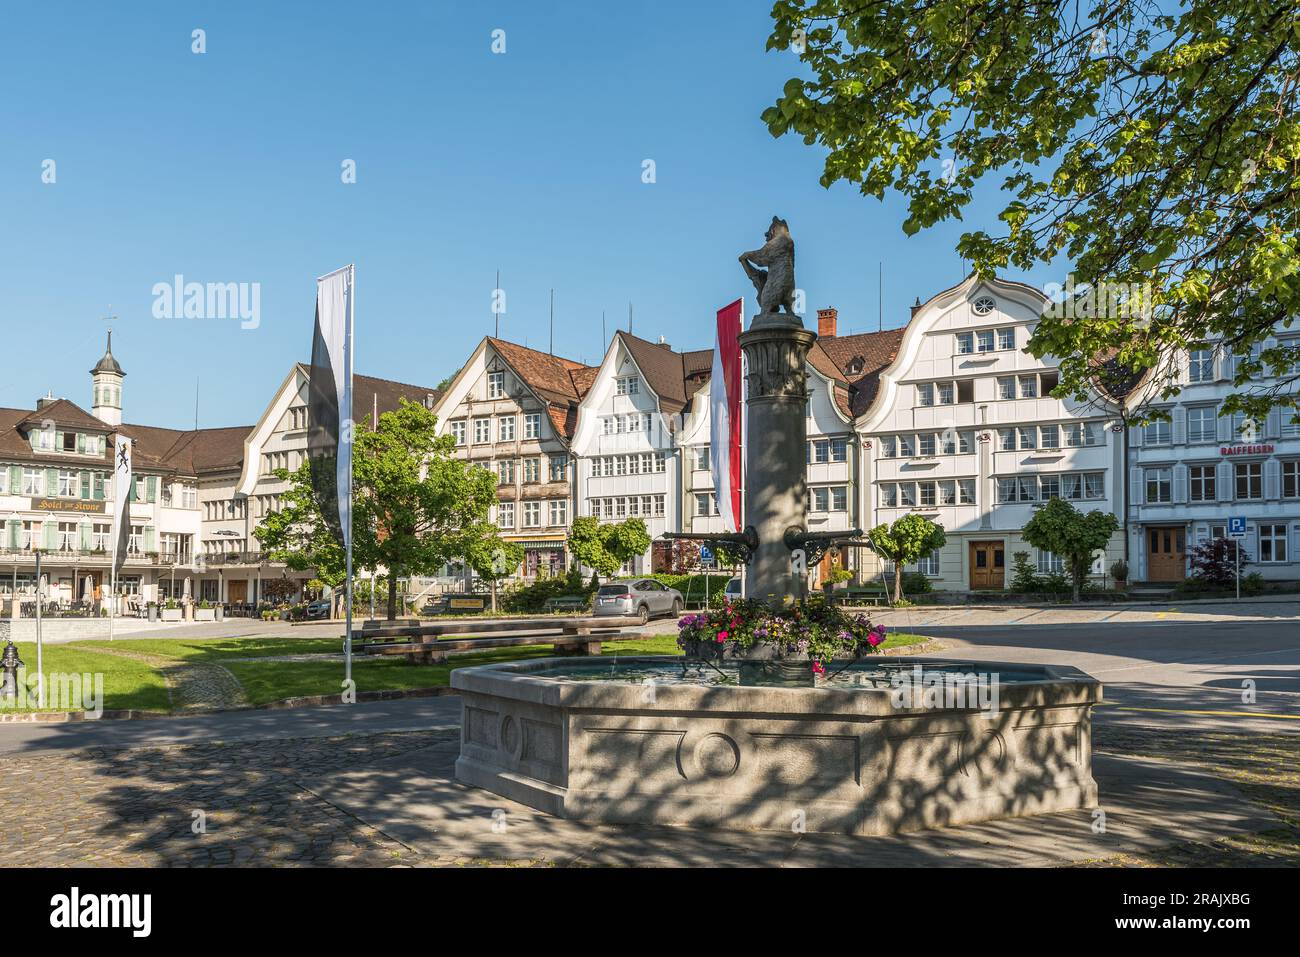 Village square with fountain and traditional Appenzell wooden houses with curved gables, Gais, Appenzell Ausserrhoden, Switzerland Stock Photo